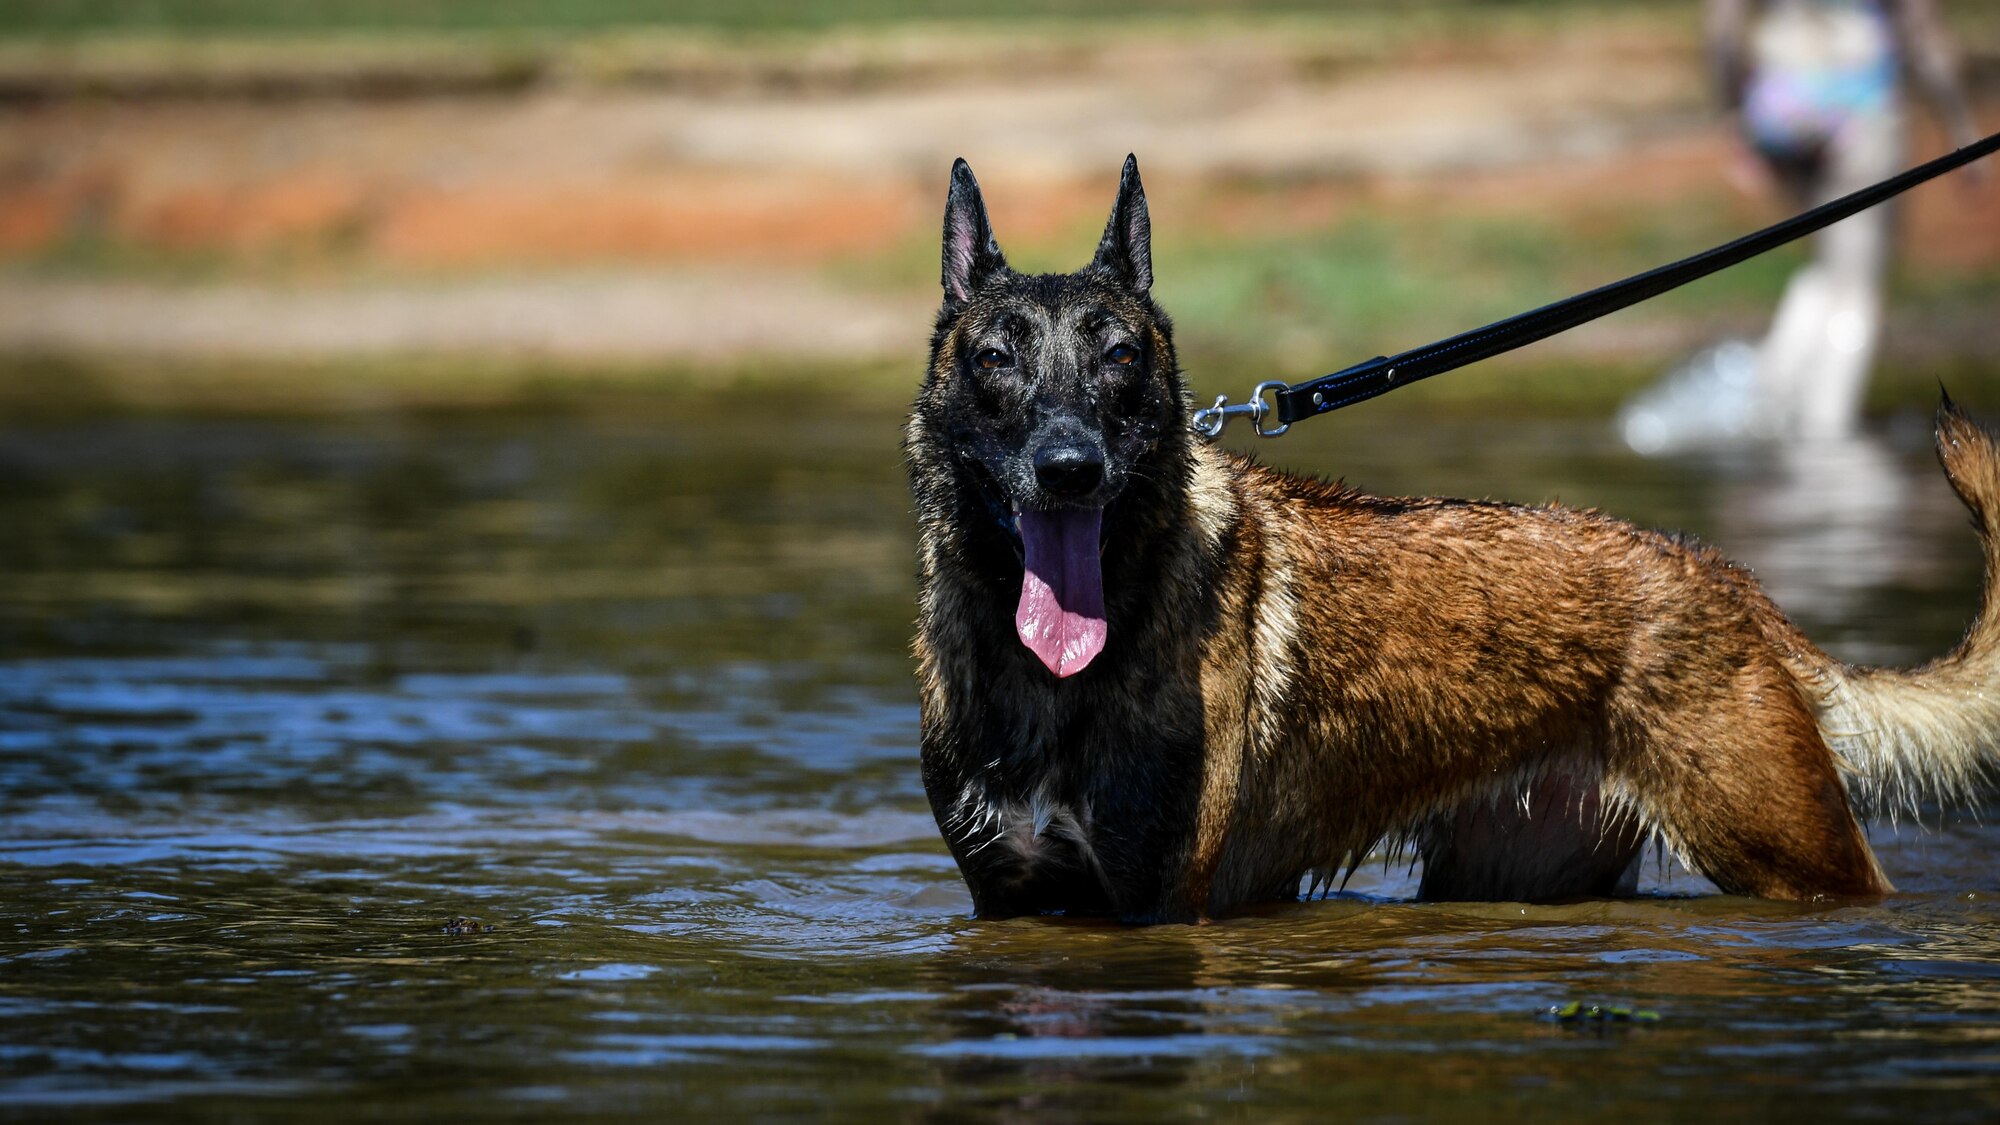 Vvelma, 2nd Security Forces Squadron military working dog, takes a break during a water aggression training session in Benton, La., Sept. 6, 2017. The water aggression training session provided MWDs with an opportunity to increase their skills by adding water take-downs to their current skillset